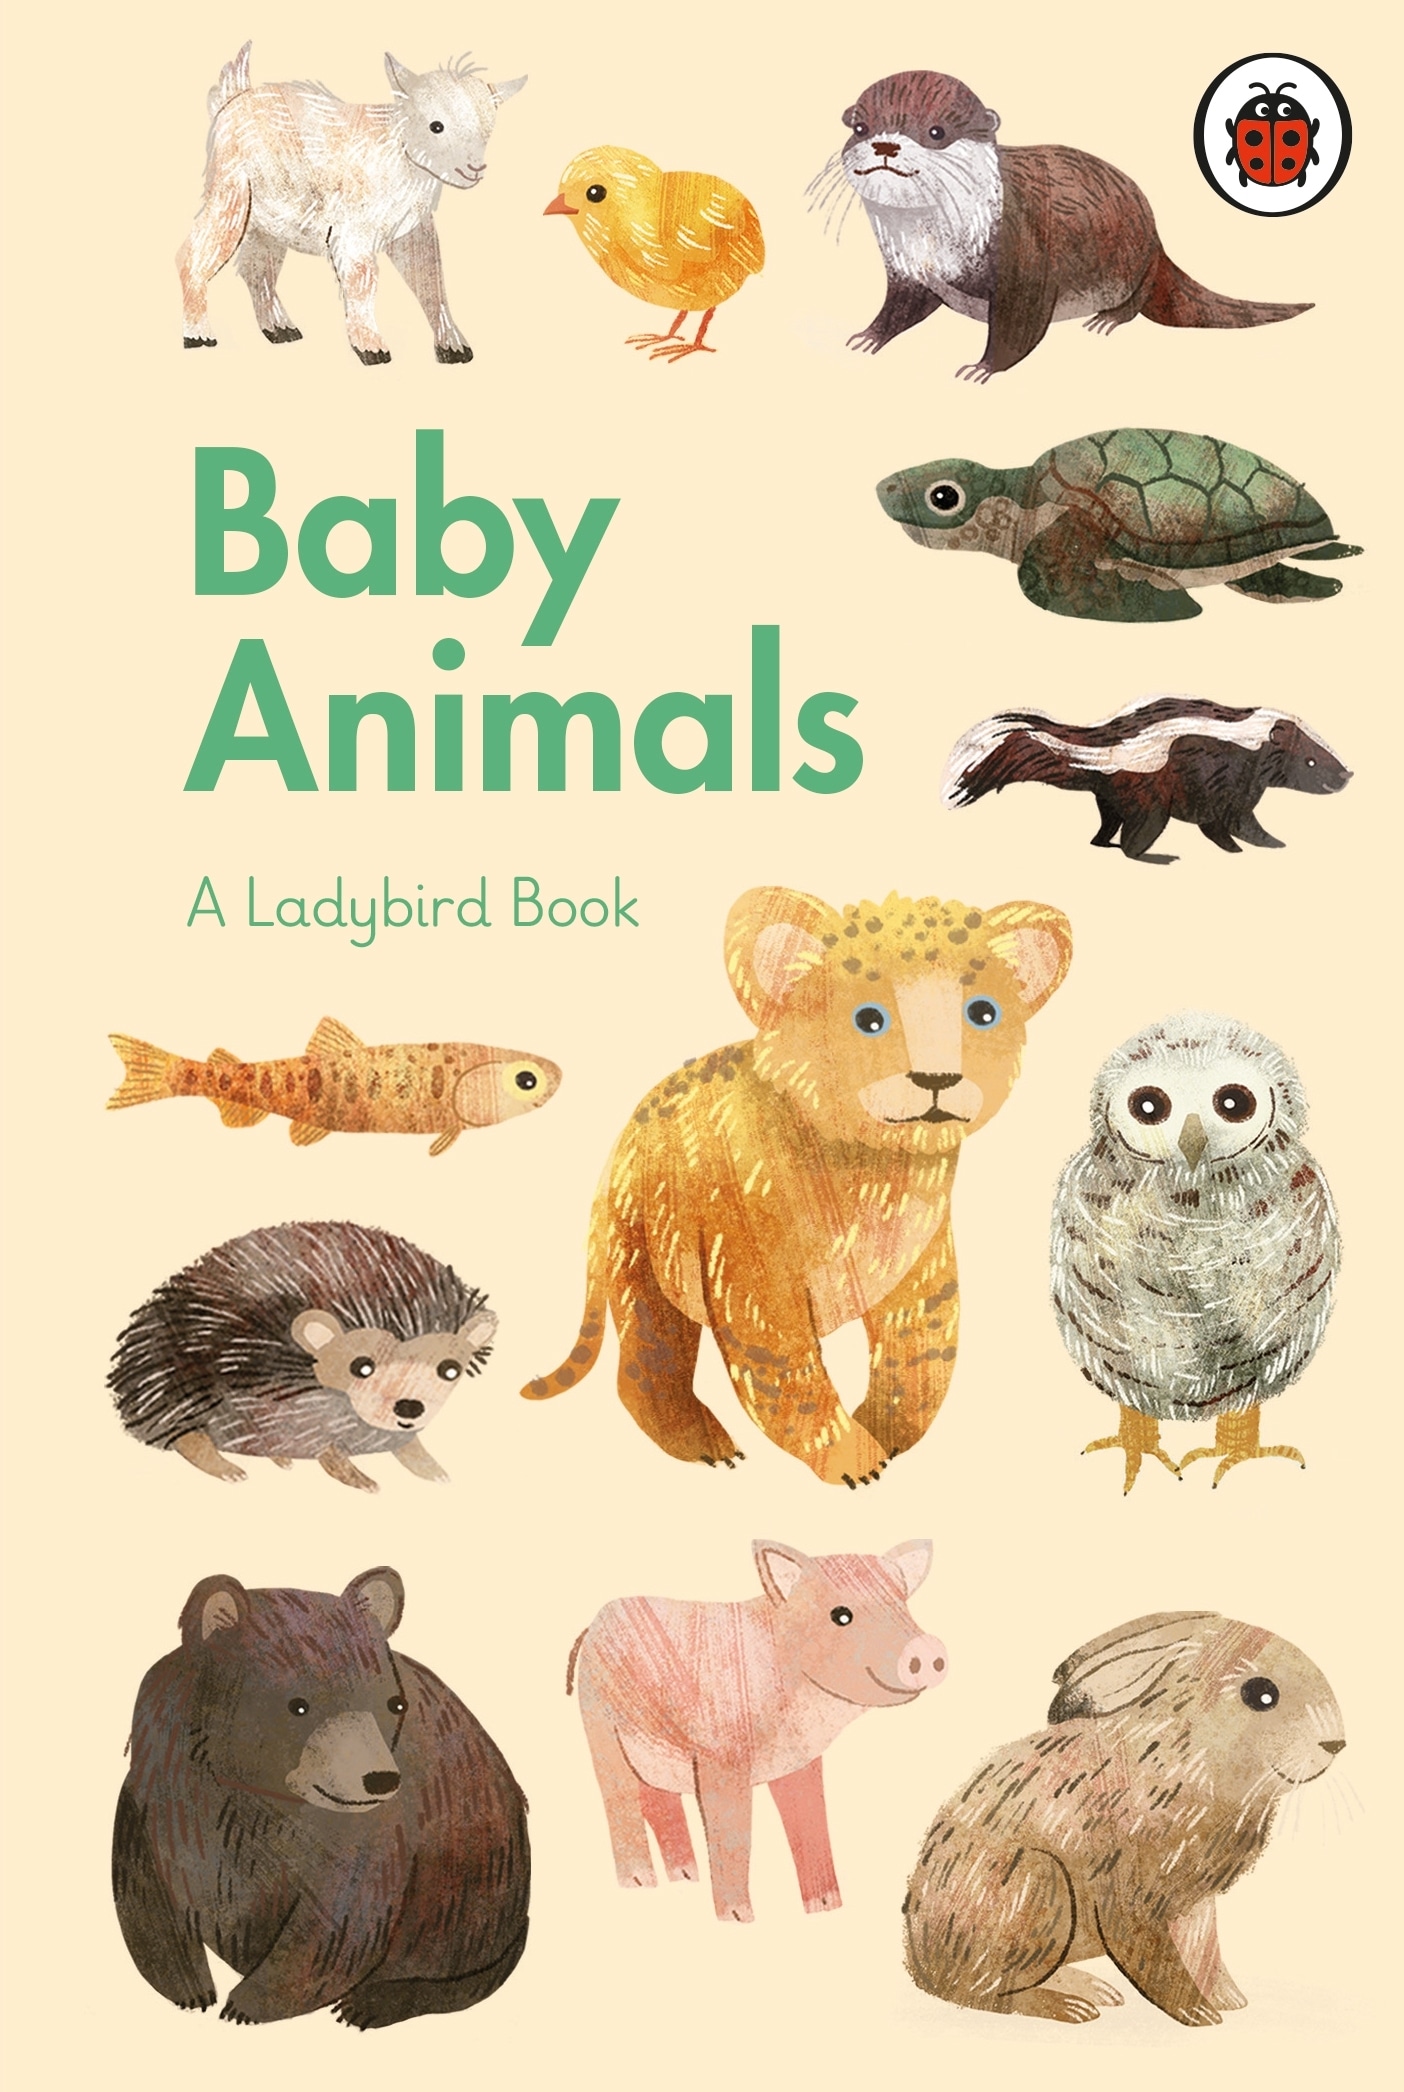 Book “A Ladybird Book: Baby Animals” by Stephanie Fizer Coleman — May 6, 2021